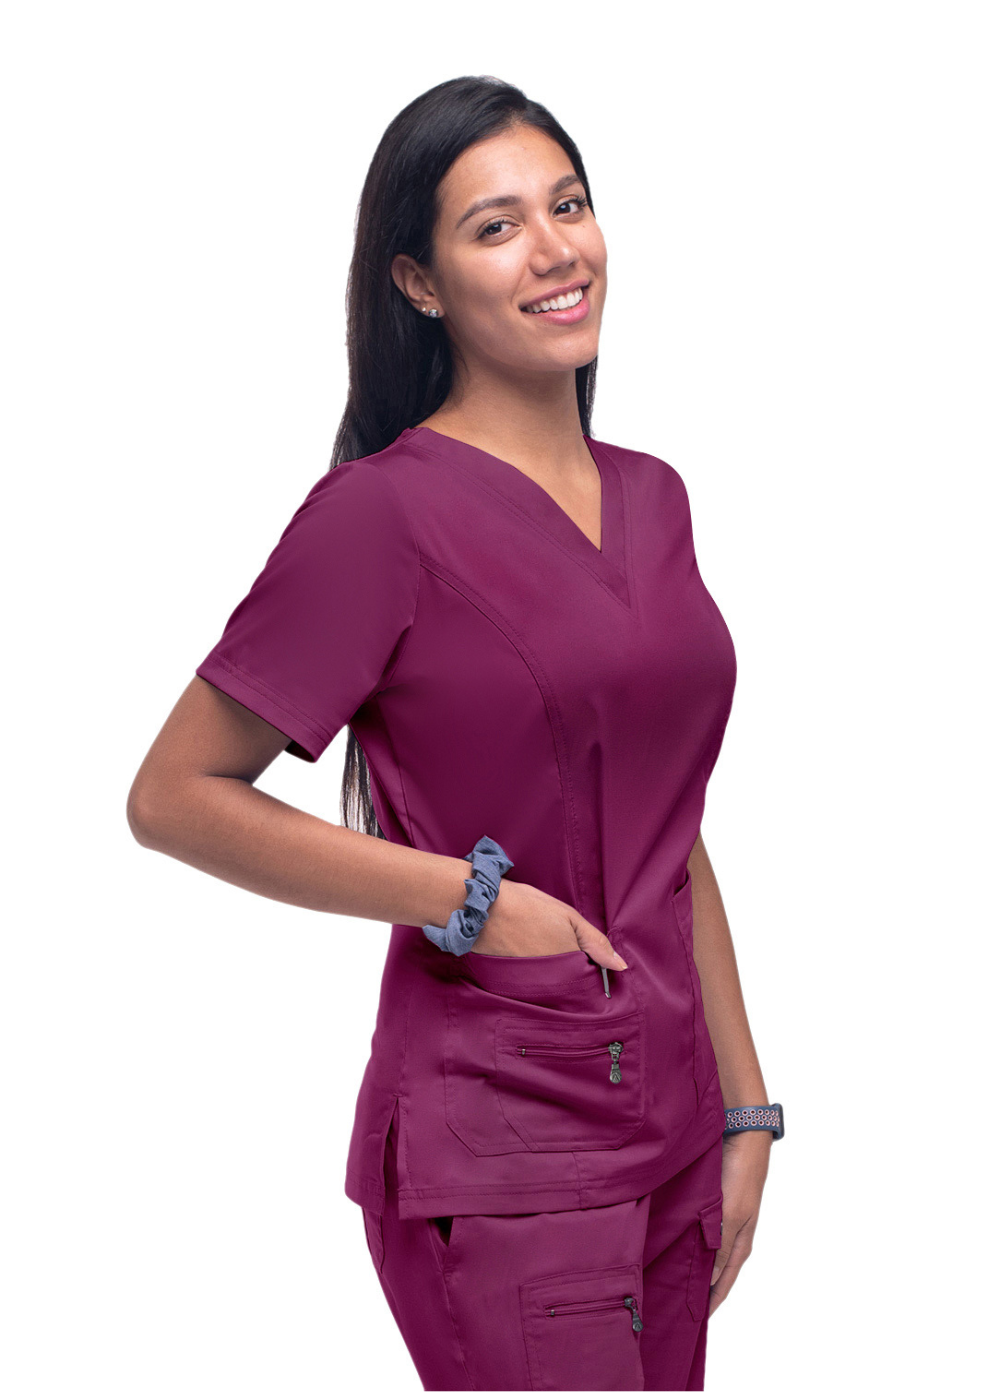 ADAR Elevated V-Neck Scrub Top w/ Zipper P4212 ( paired with #4100 pant or #7104 jogger)